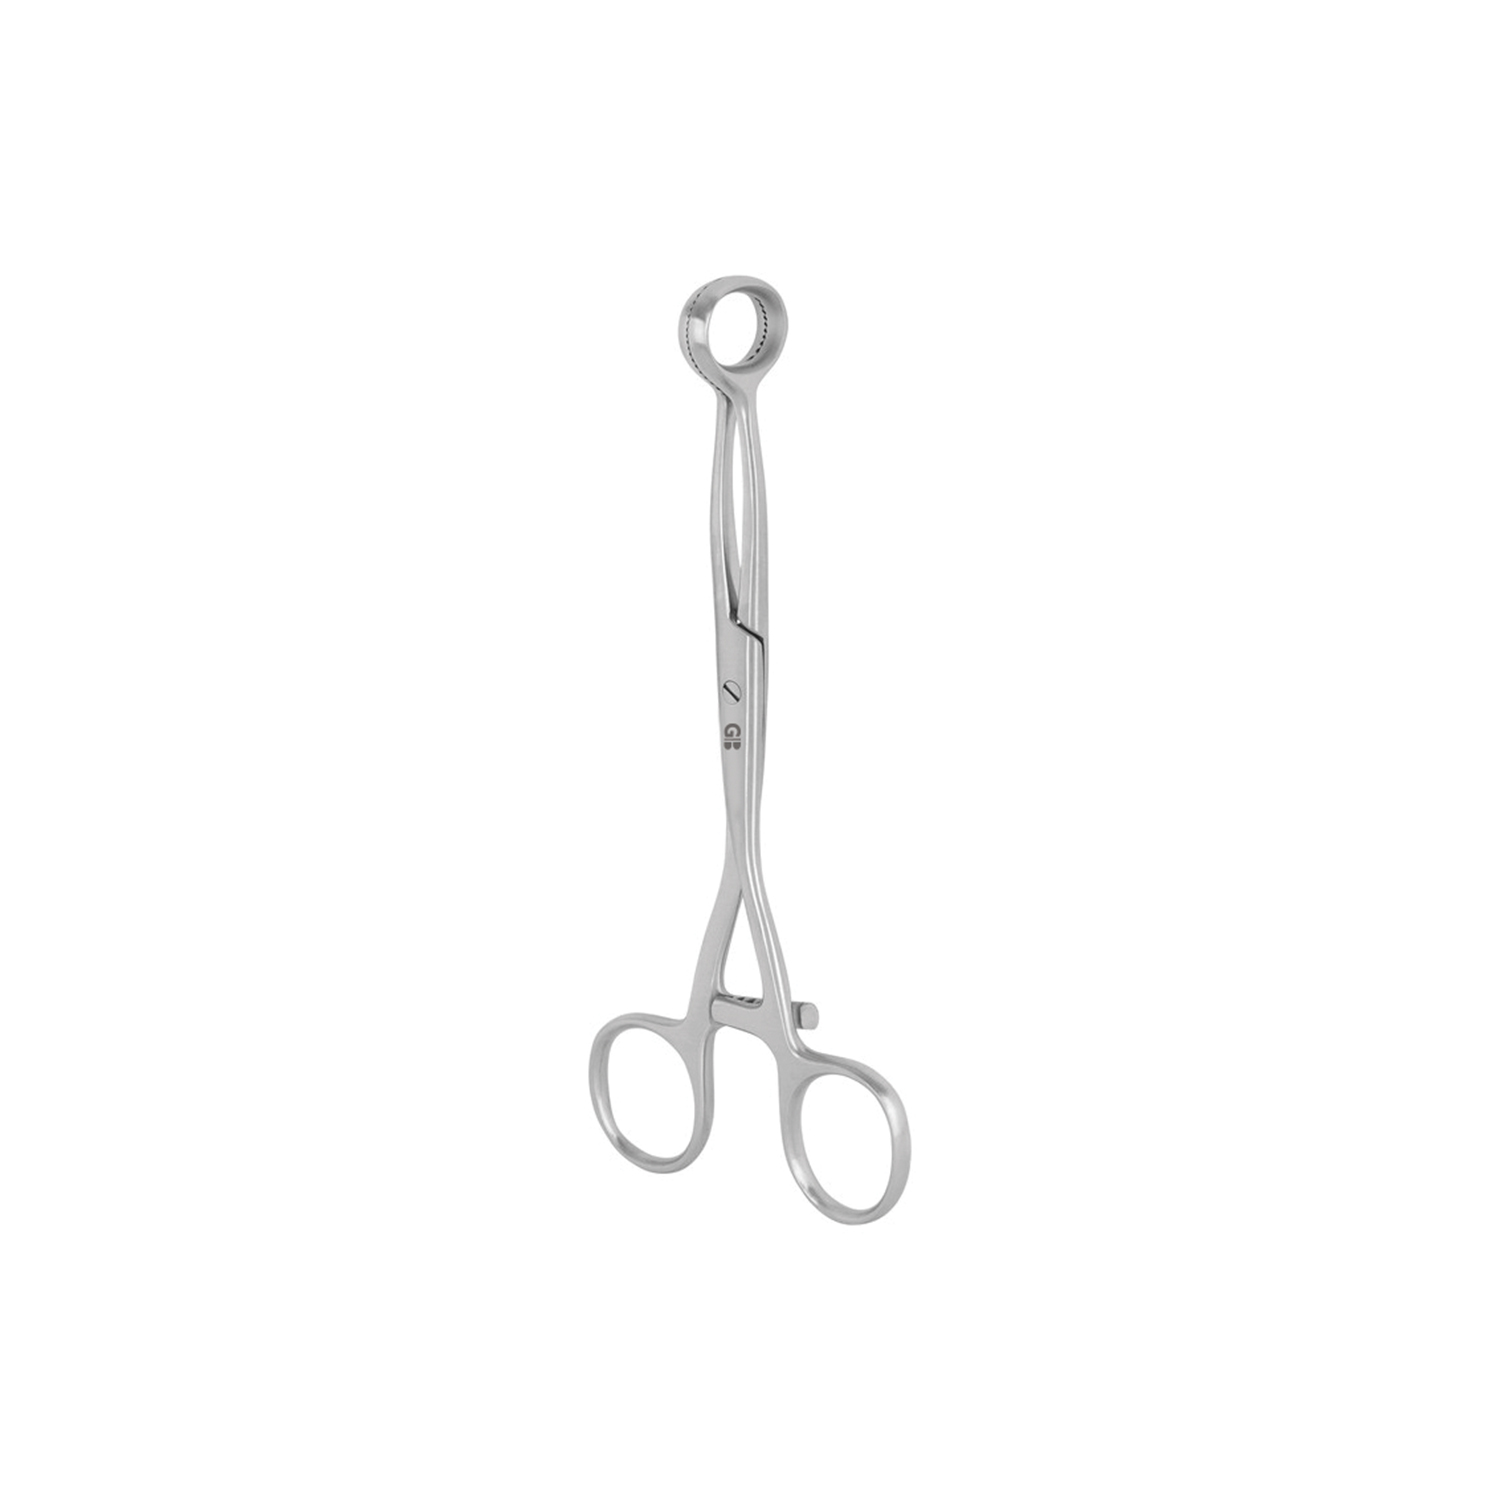 Organ And Tongue Holding Forceps